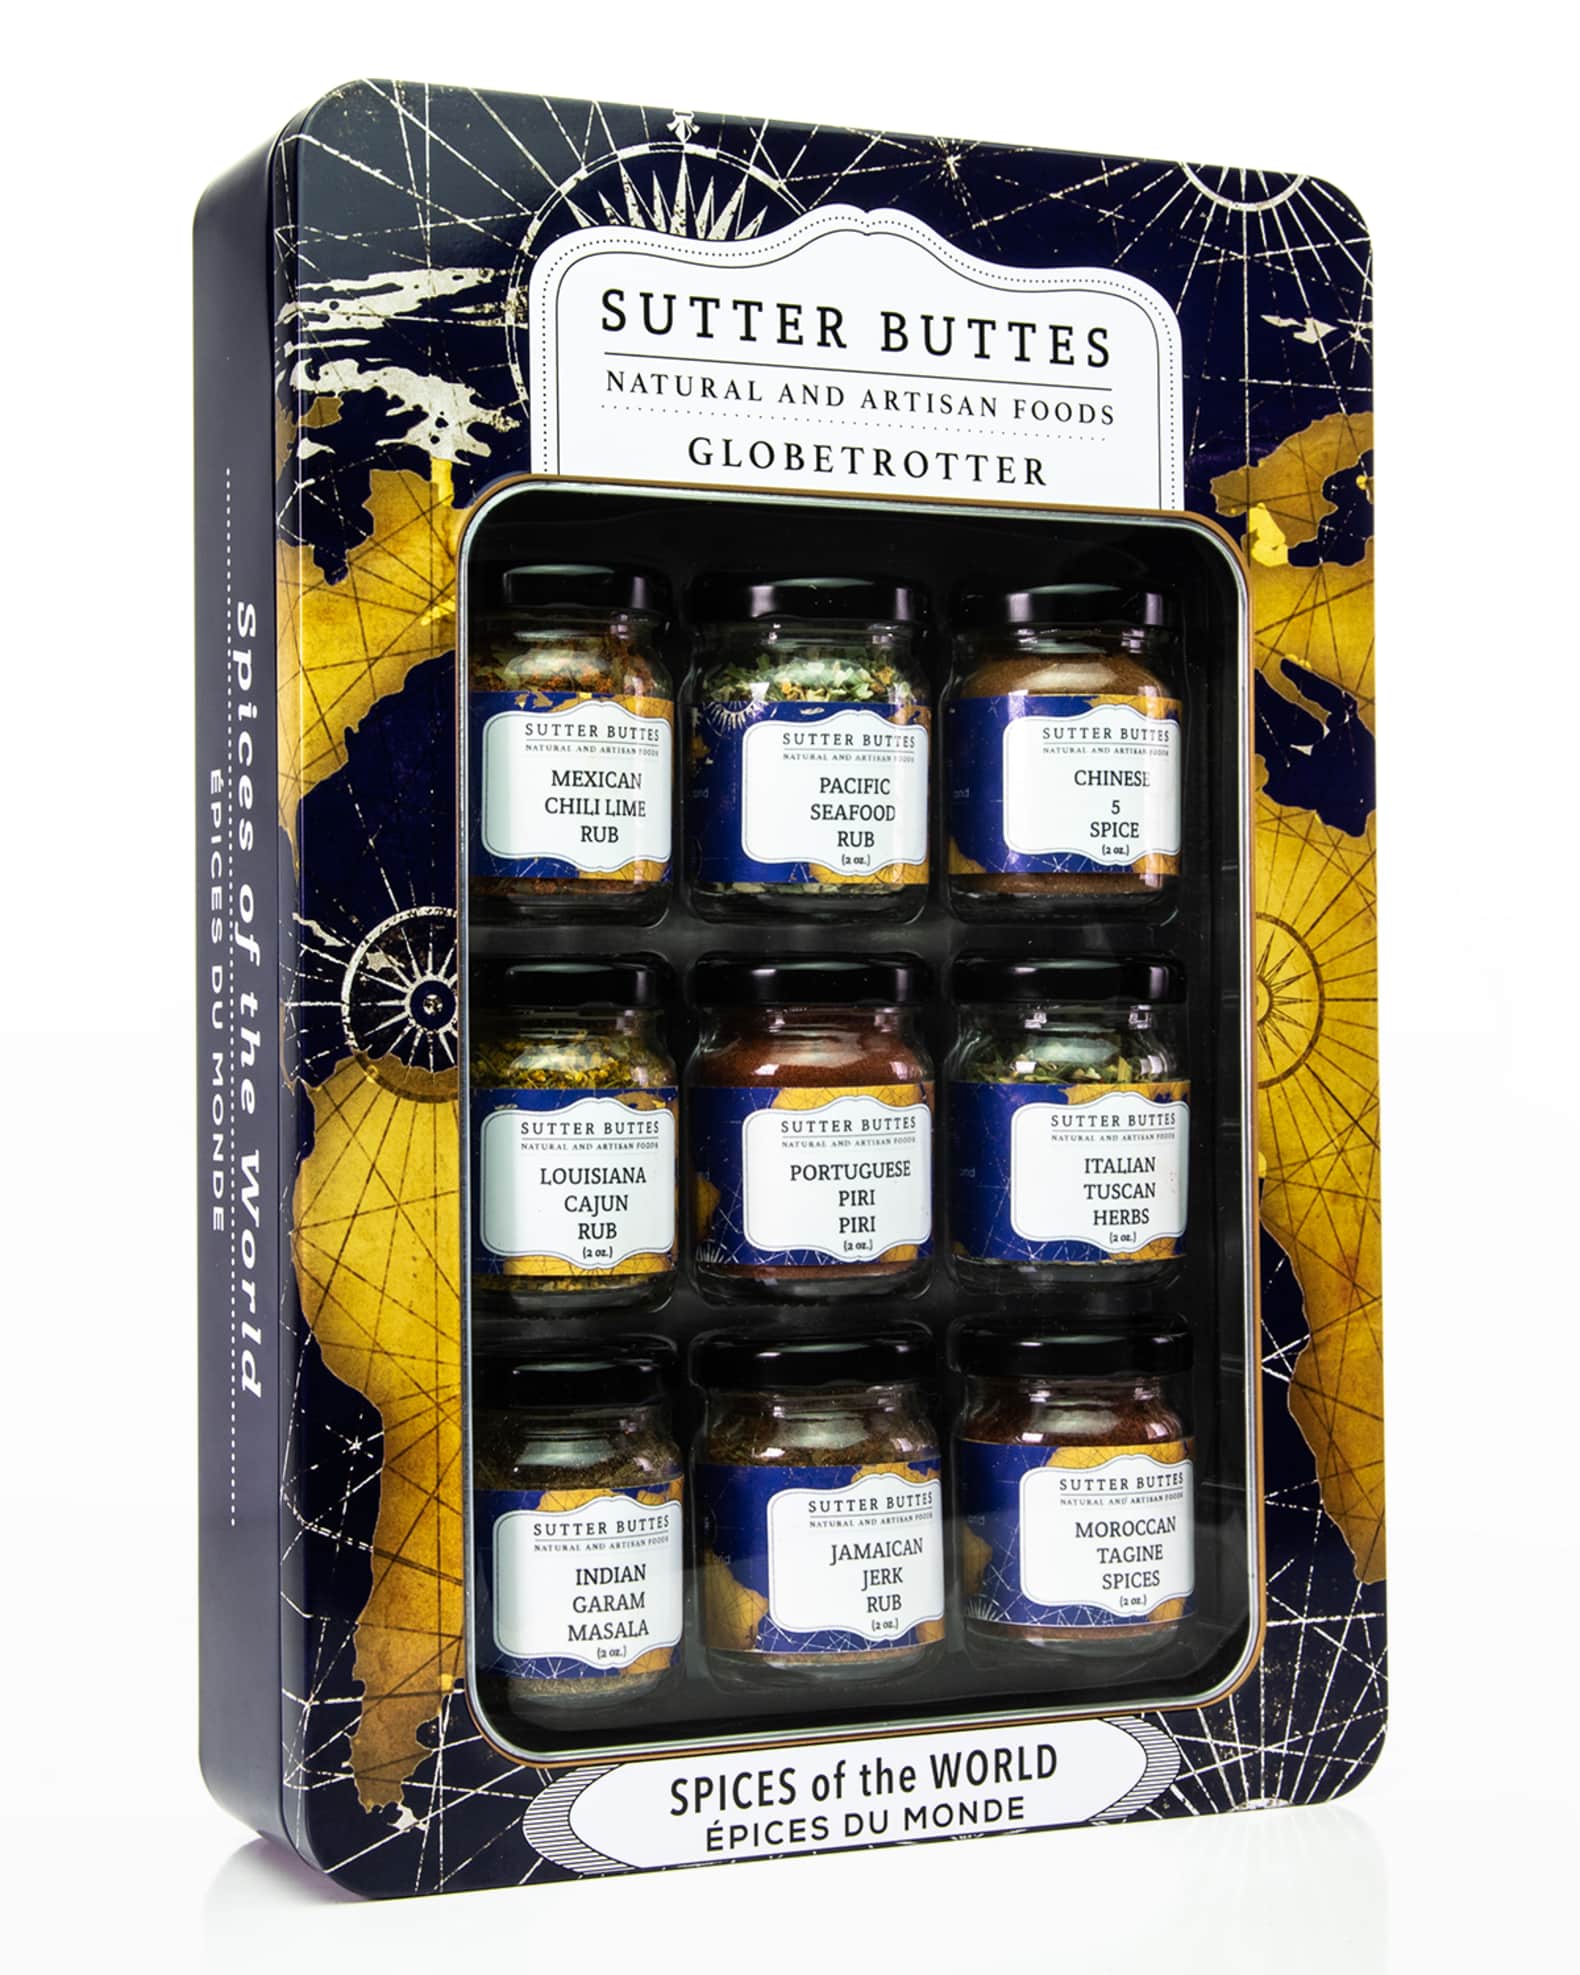 Sutter Buttes Natural and Artisan Foods Globetrotter Spice Tin Horchow